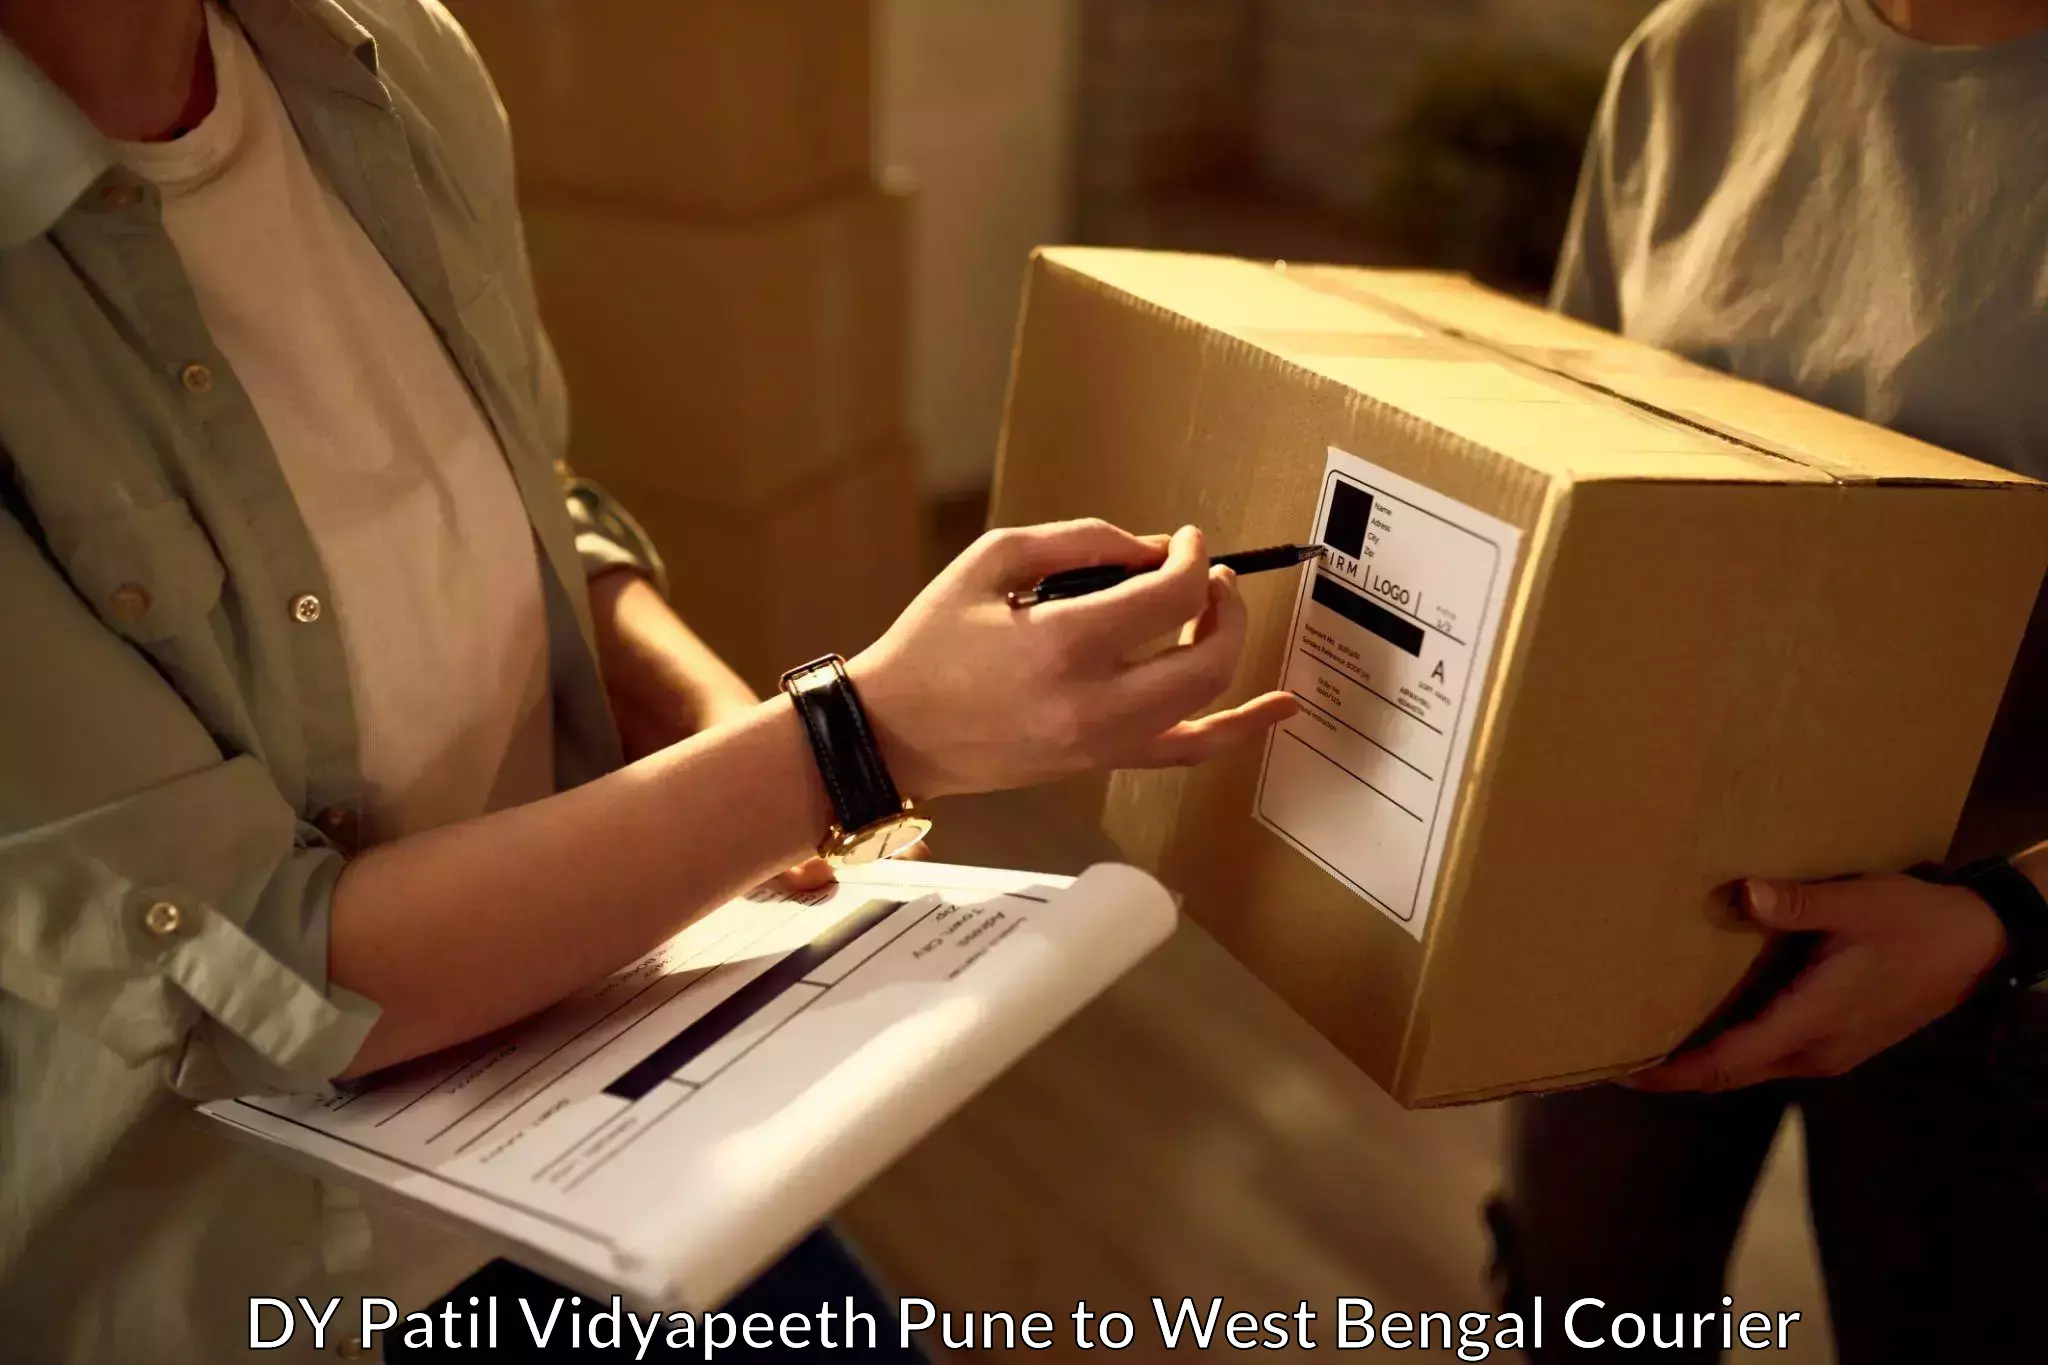 Weekend courier service DY Patil Vidyapeeth Pune to Basirhat